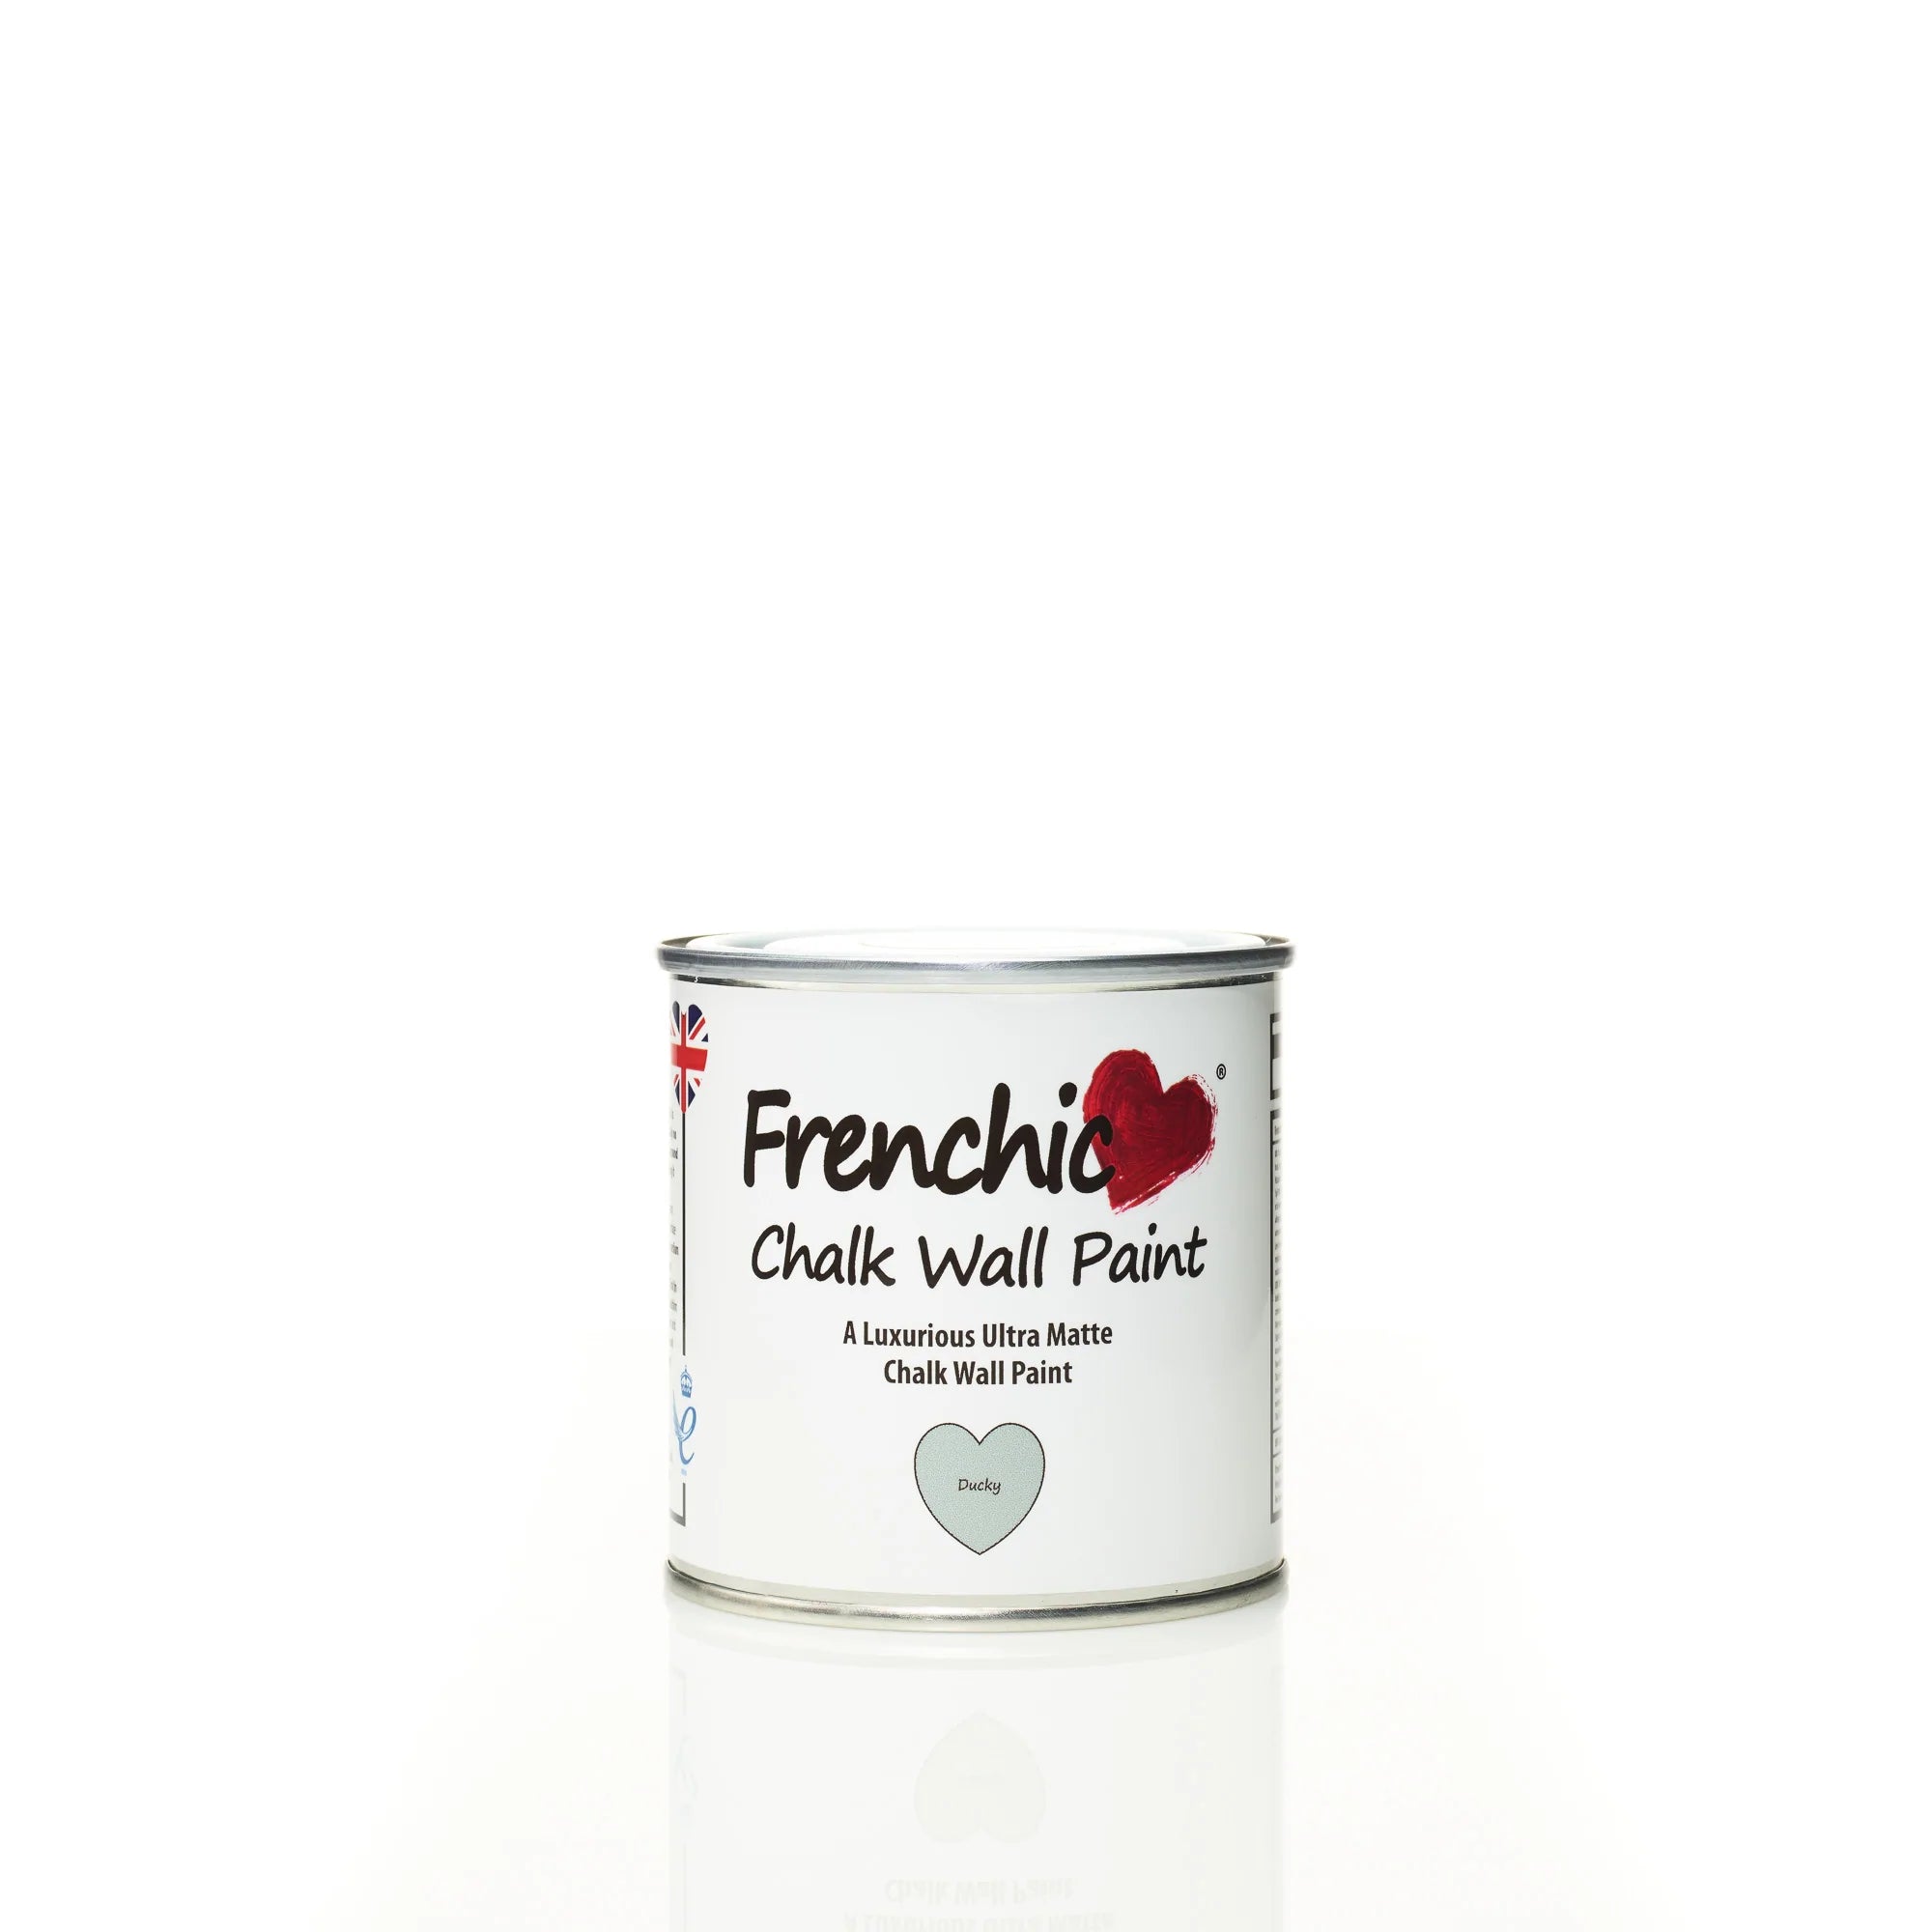 Frenchic Paint | Ducky Chalk Wall Paint by Weirs of Baggot St